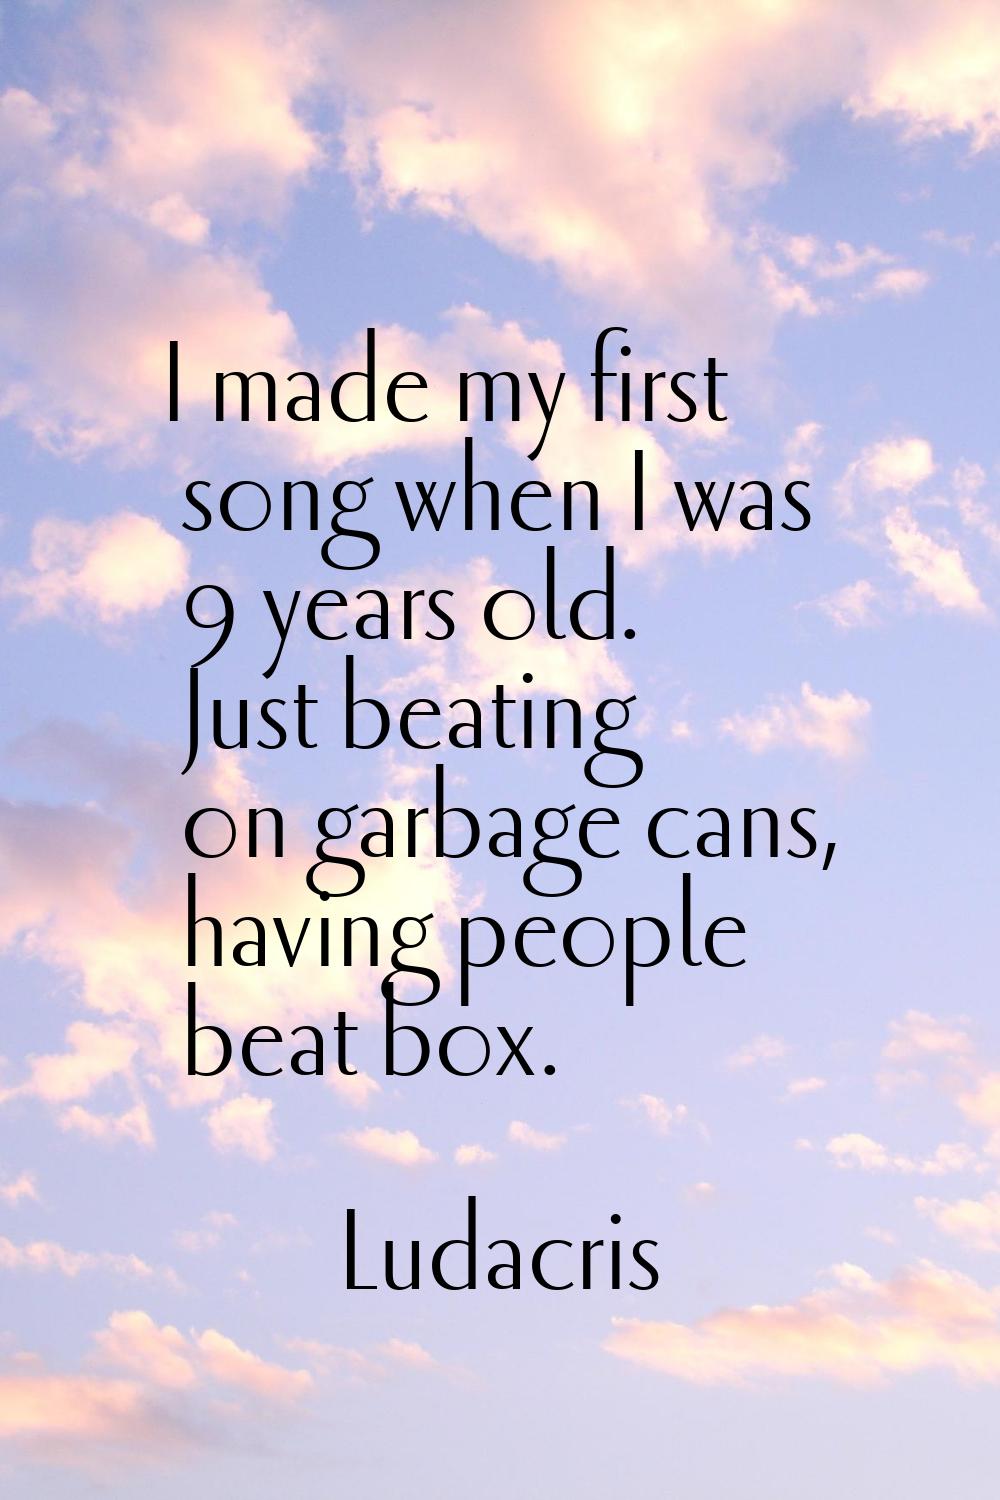 I made my first song when I was 9 years old. Just beating on garbage cans, having people beat box.